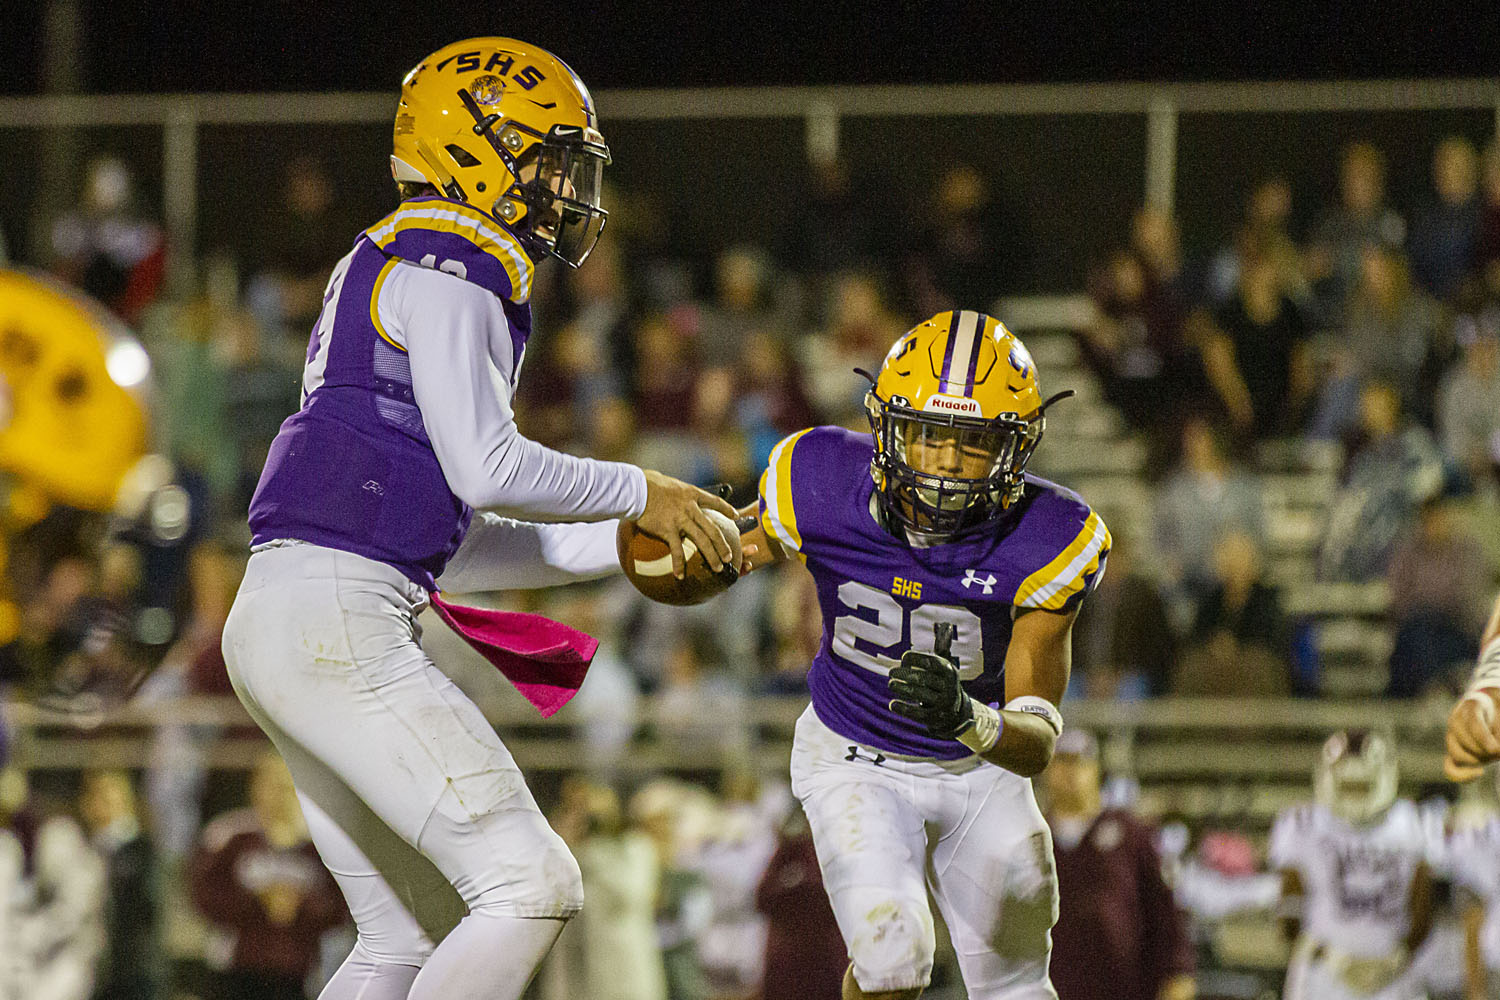 Springville completes season with resounding victory over St. Clair County